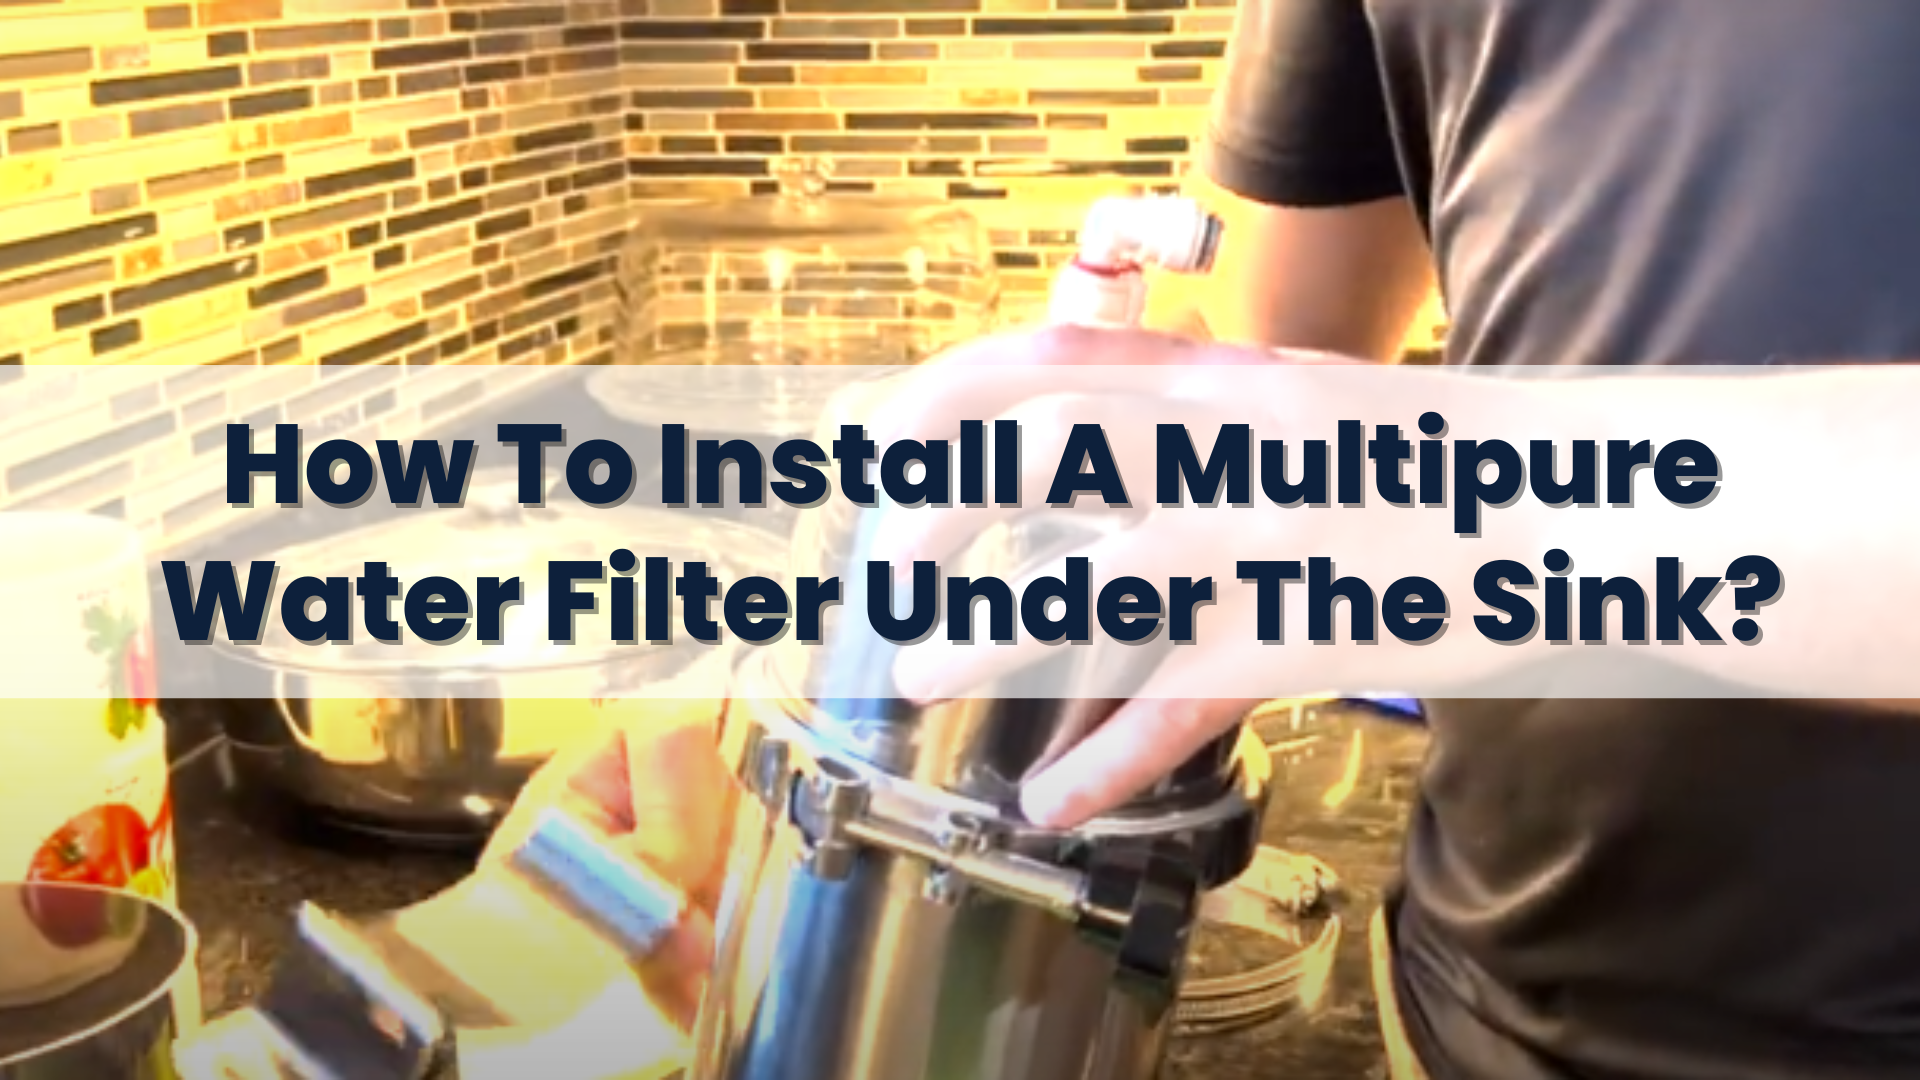 How To Install A Multipure Water Filter Under The Sink